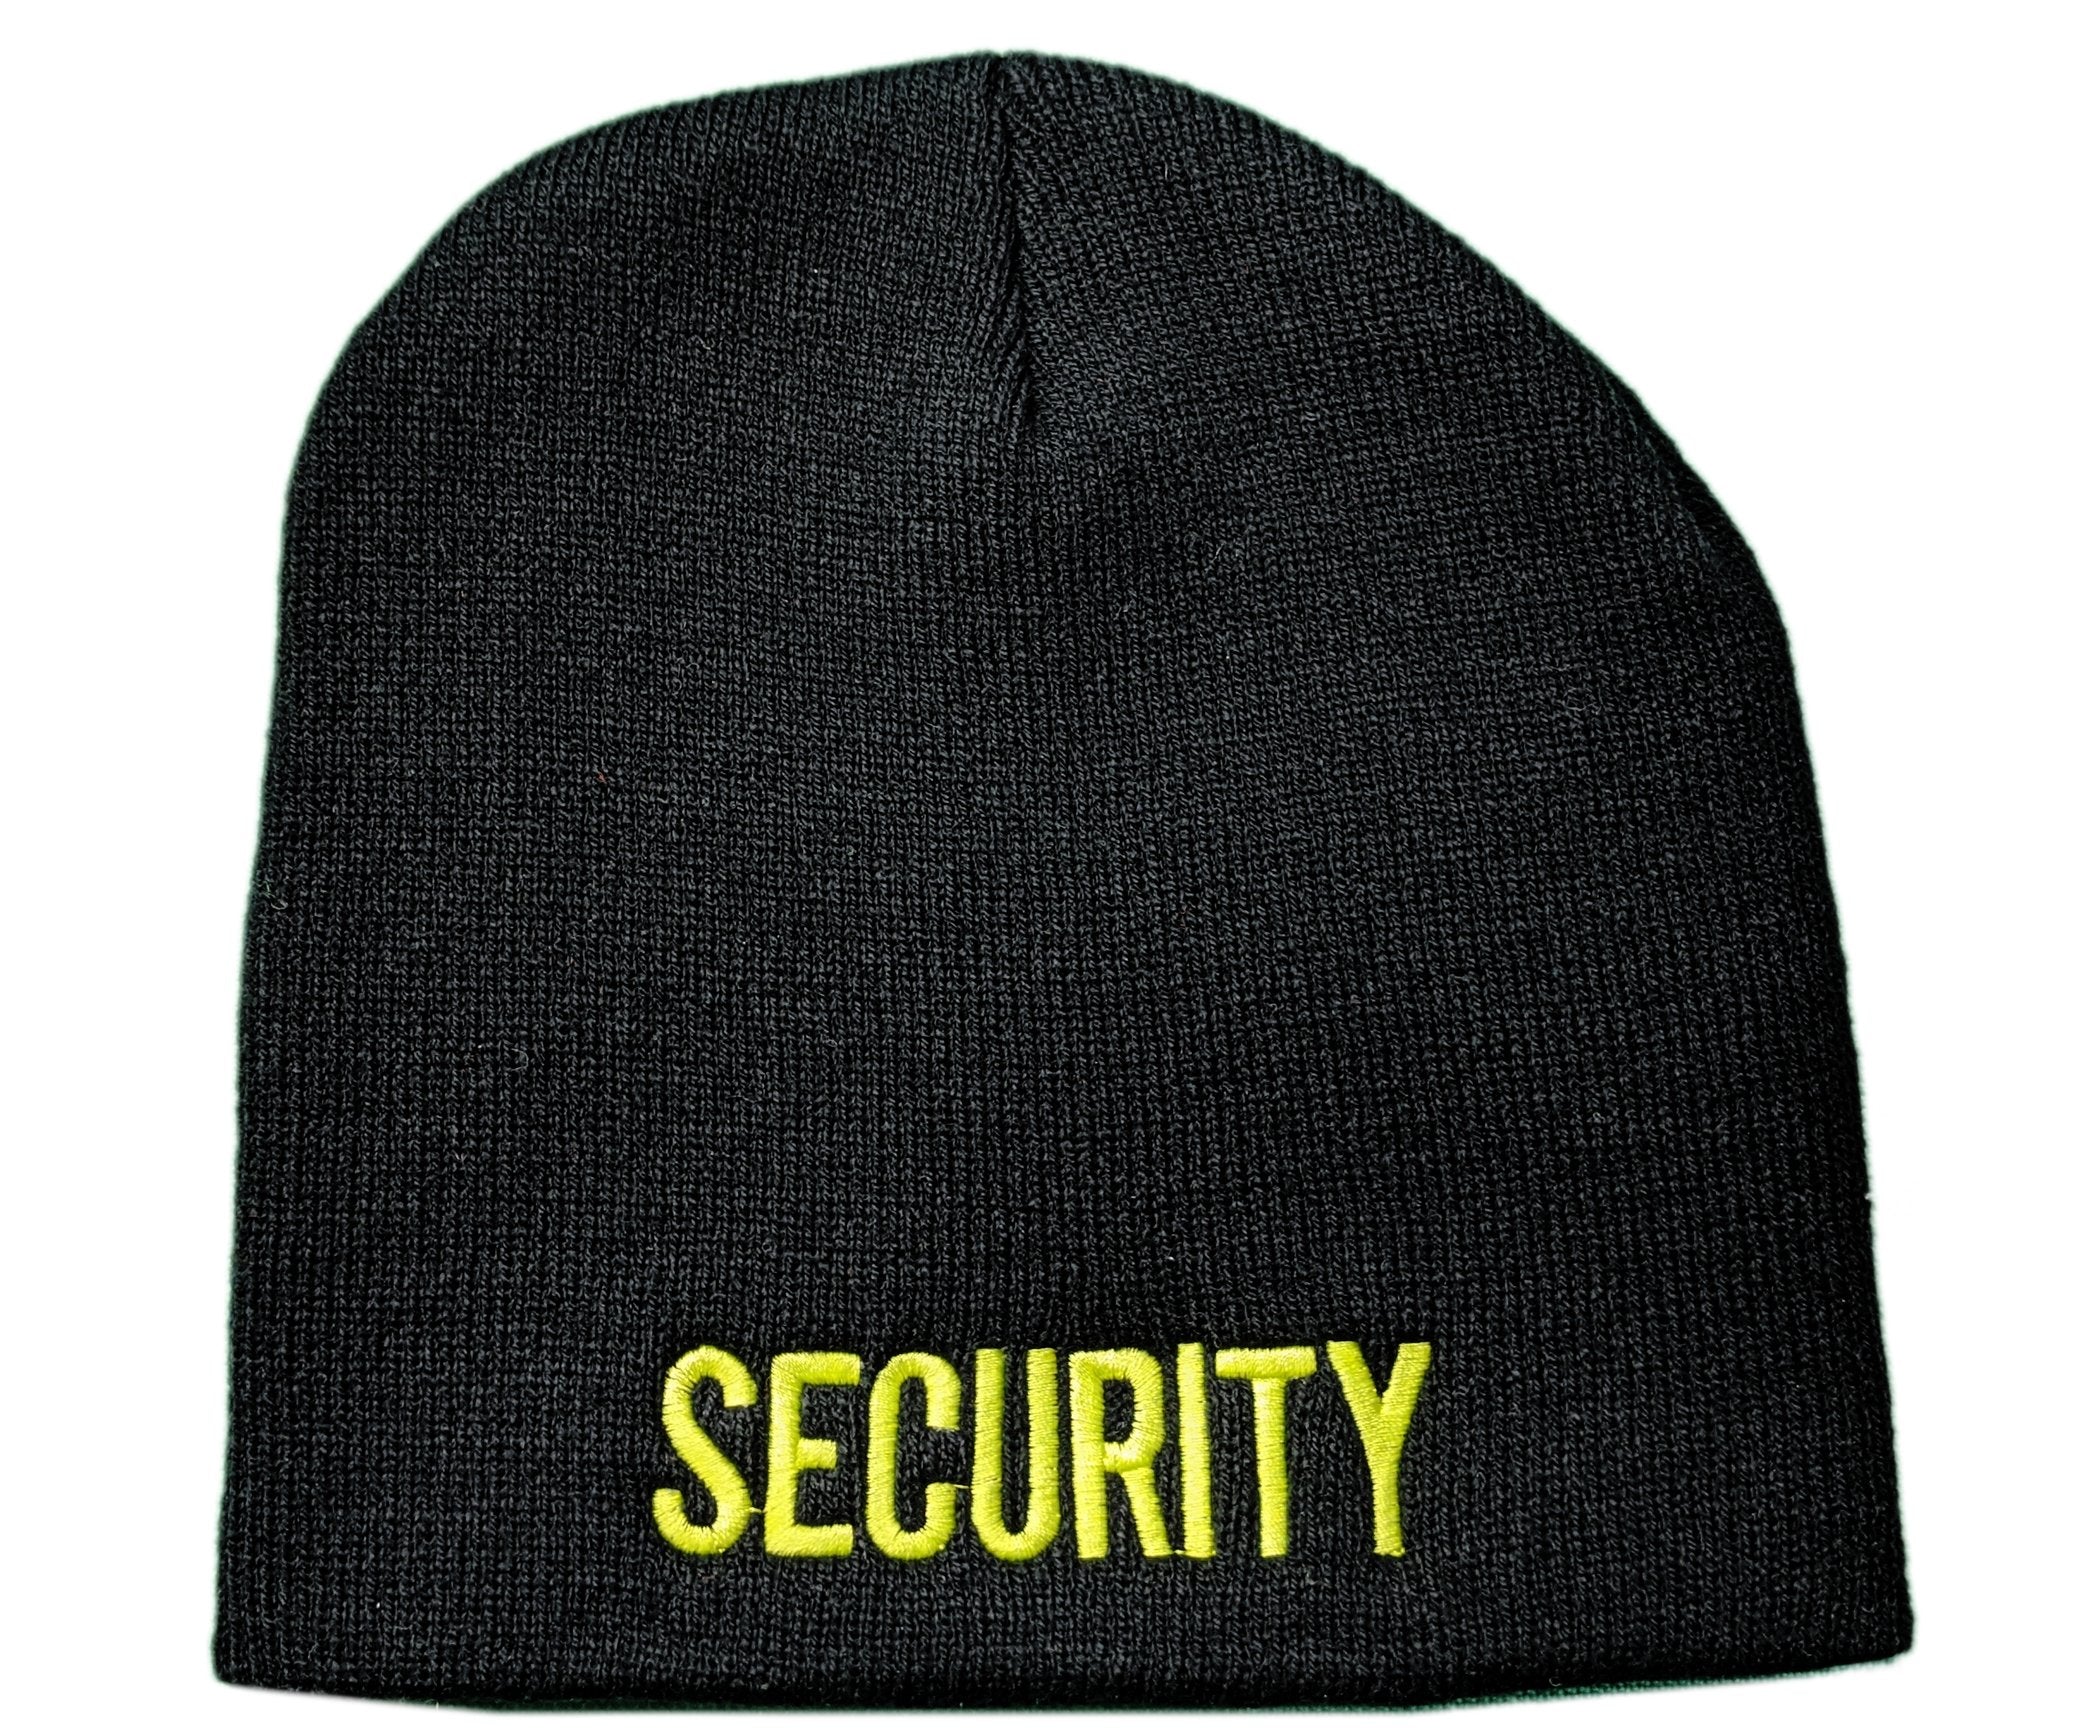 Men's Security Knit Cap Beanie USA Embroidered Winter Hat (Black/Neon)